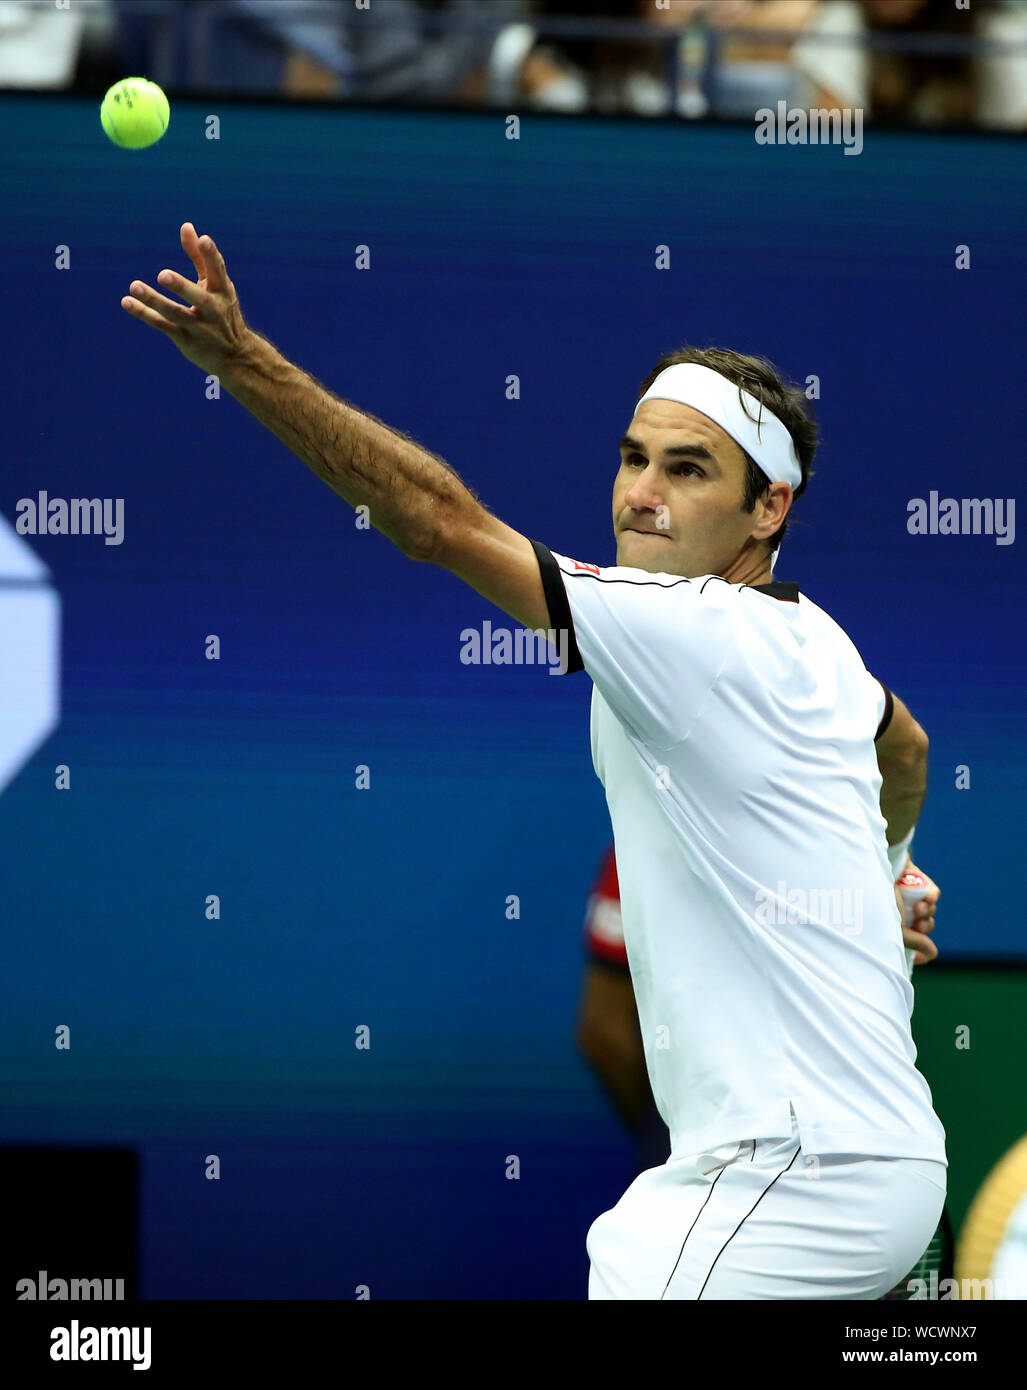 Roger Federer of Switzerland serves to Damir Dzumhur of Bosnia and  Herzegovina in the second round match at the 2019 US Open Tennis  Championships at the USTA Billie Jean King National Tennis